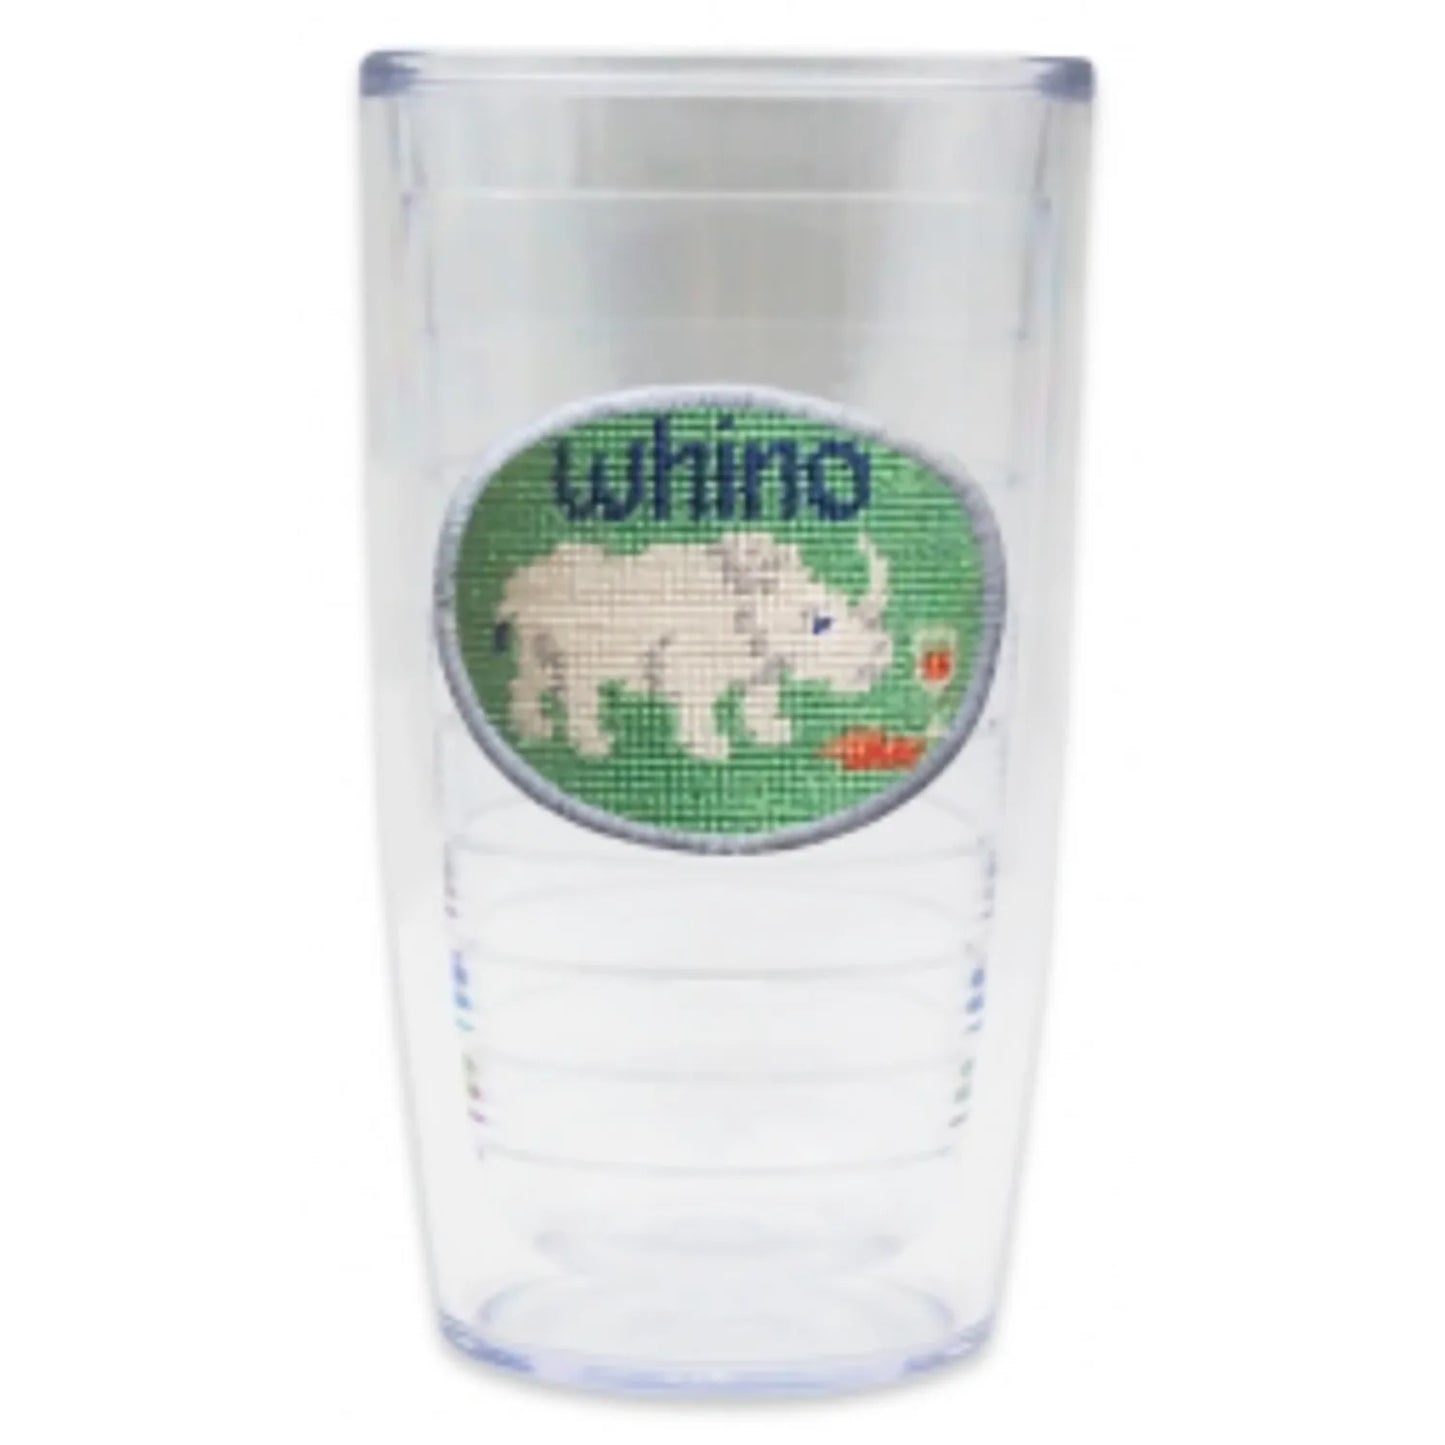 Smathers & Branson Tervis Tumblers